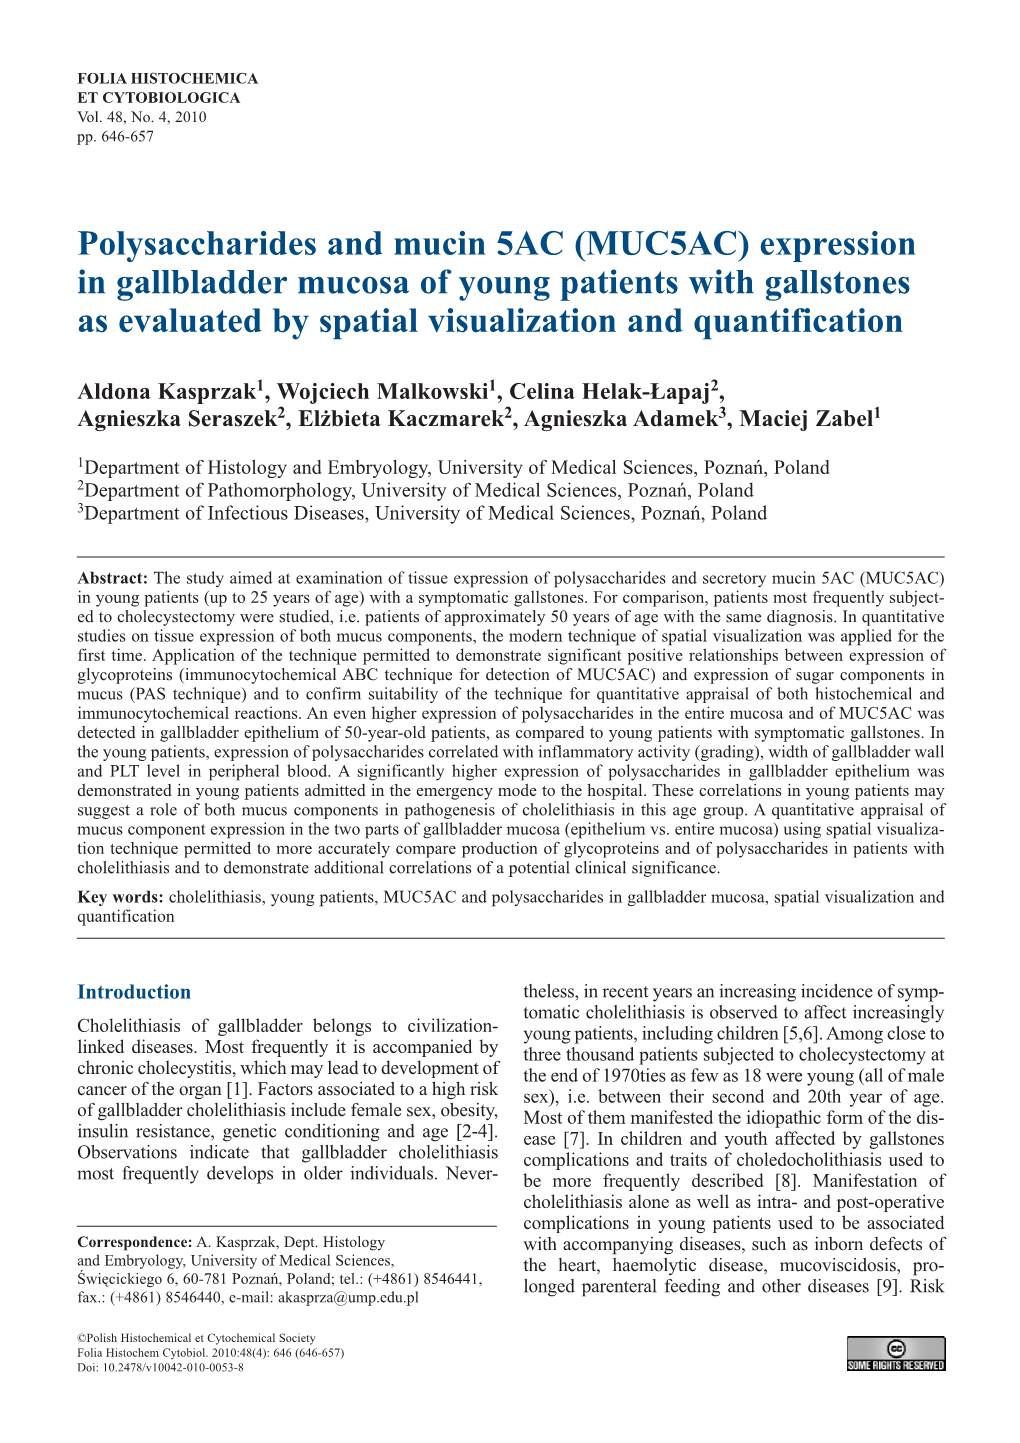 Polysaccharides and Mucin 5AC (MUC5AC) Expression in Gallbladder Mucosa of Young Patients with Gallstones As Evaluated by Spatial Visualization and Quantification